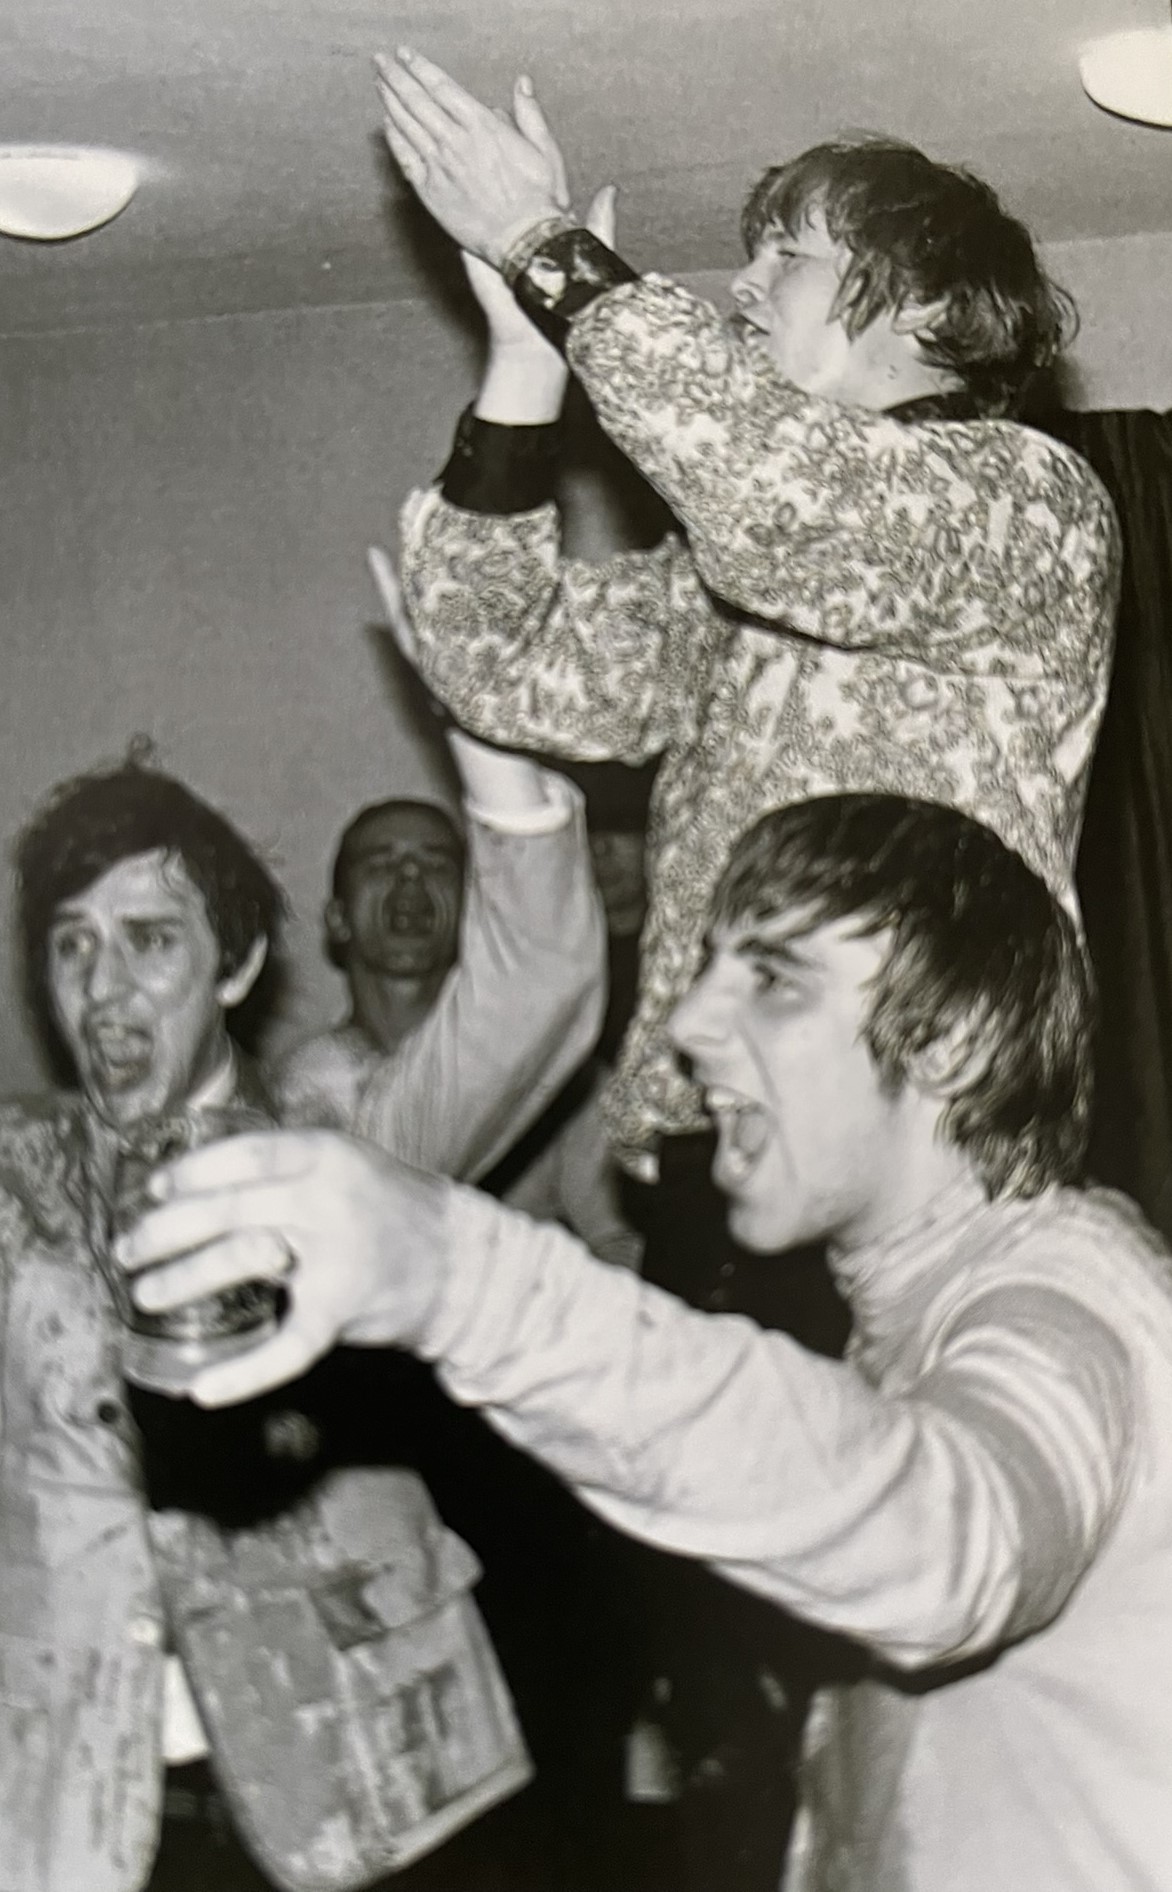 Pete Andrews, Peter Noone, and Keith Moon at the birthday party